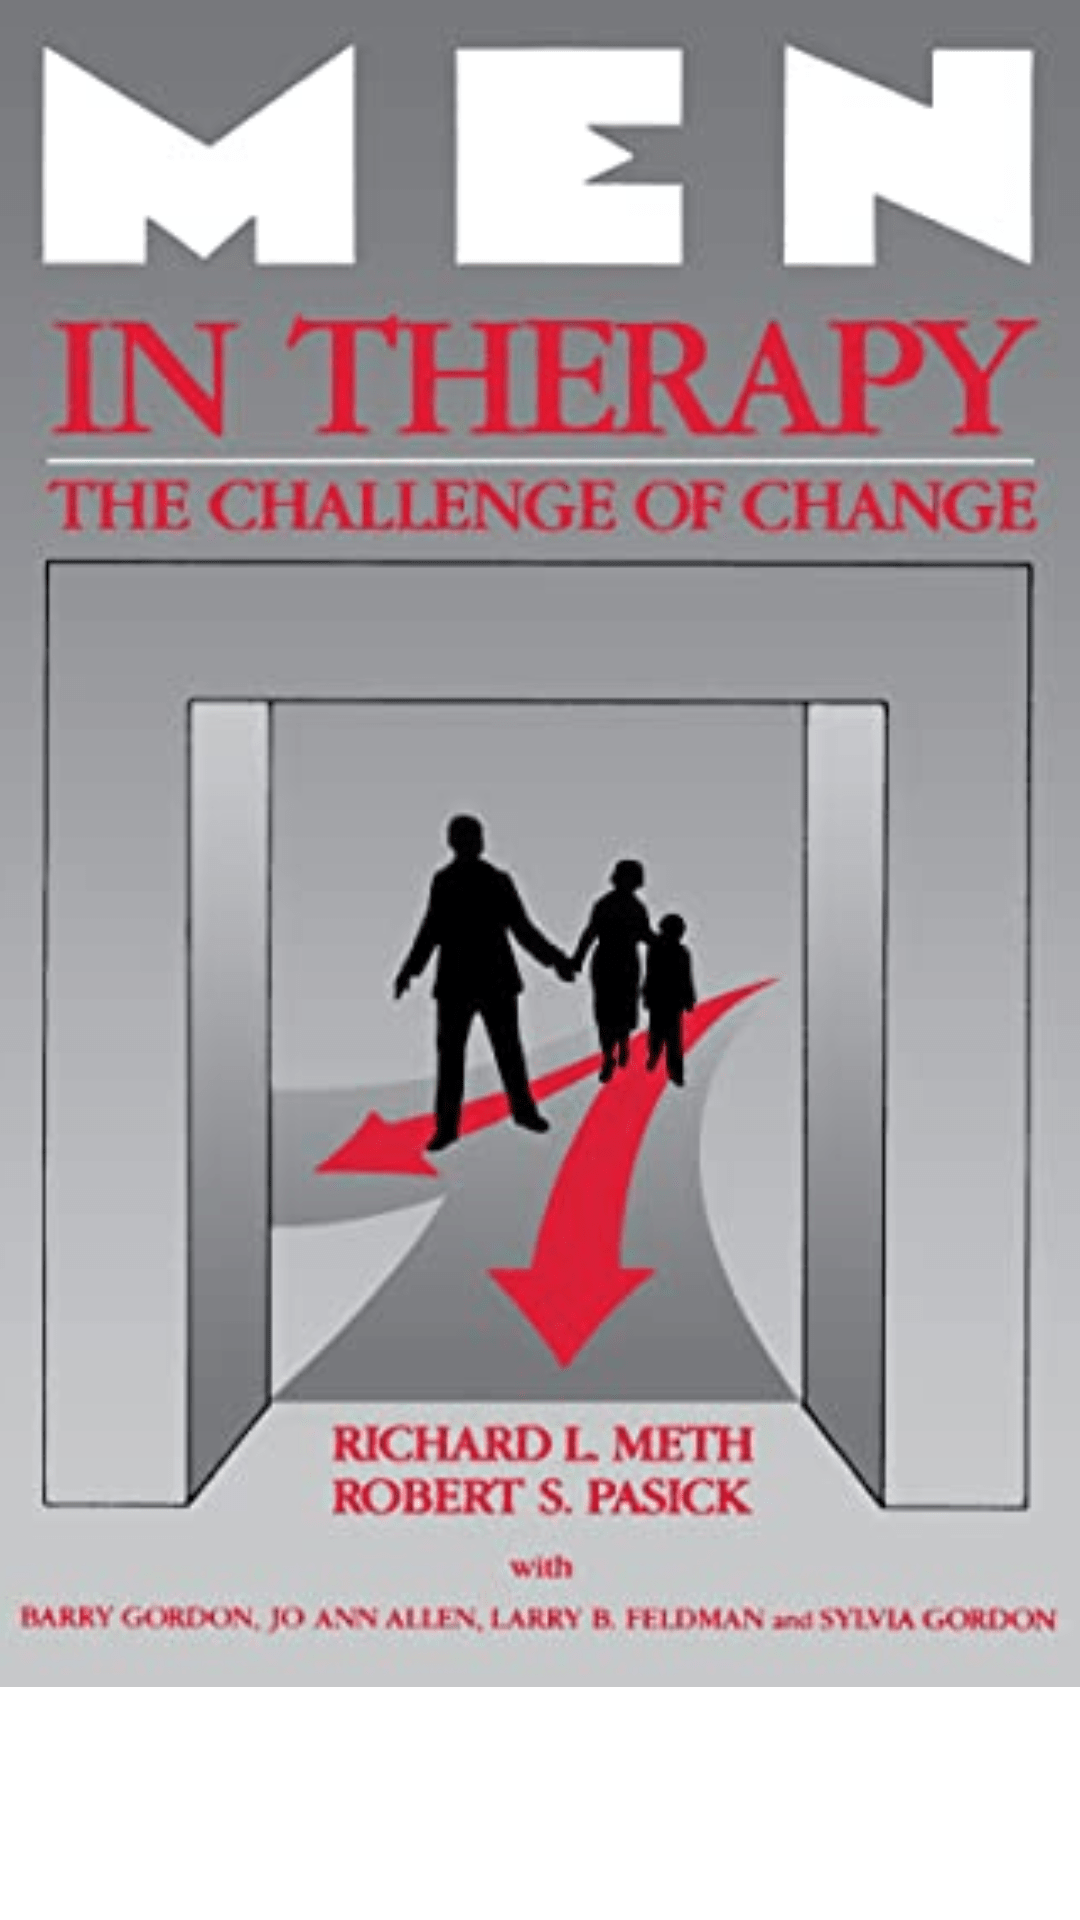 Men in Therapy: The Challenge of Change